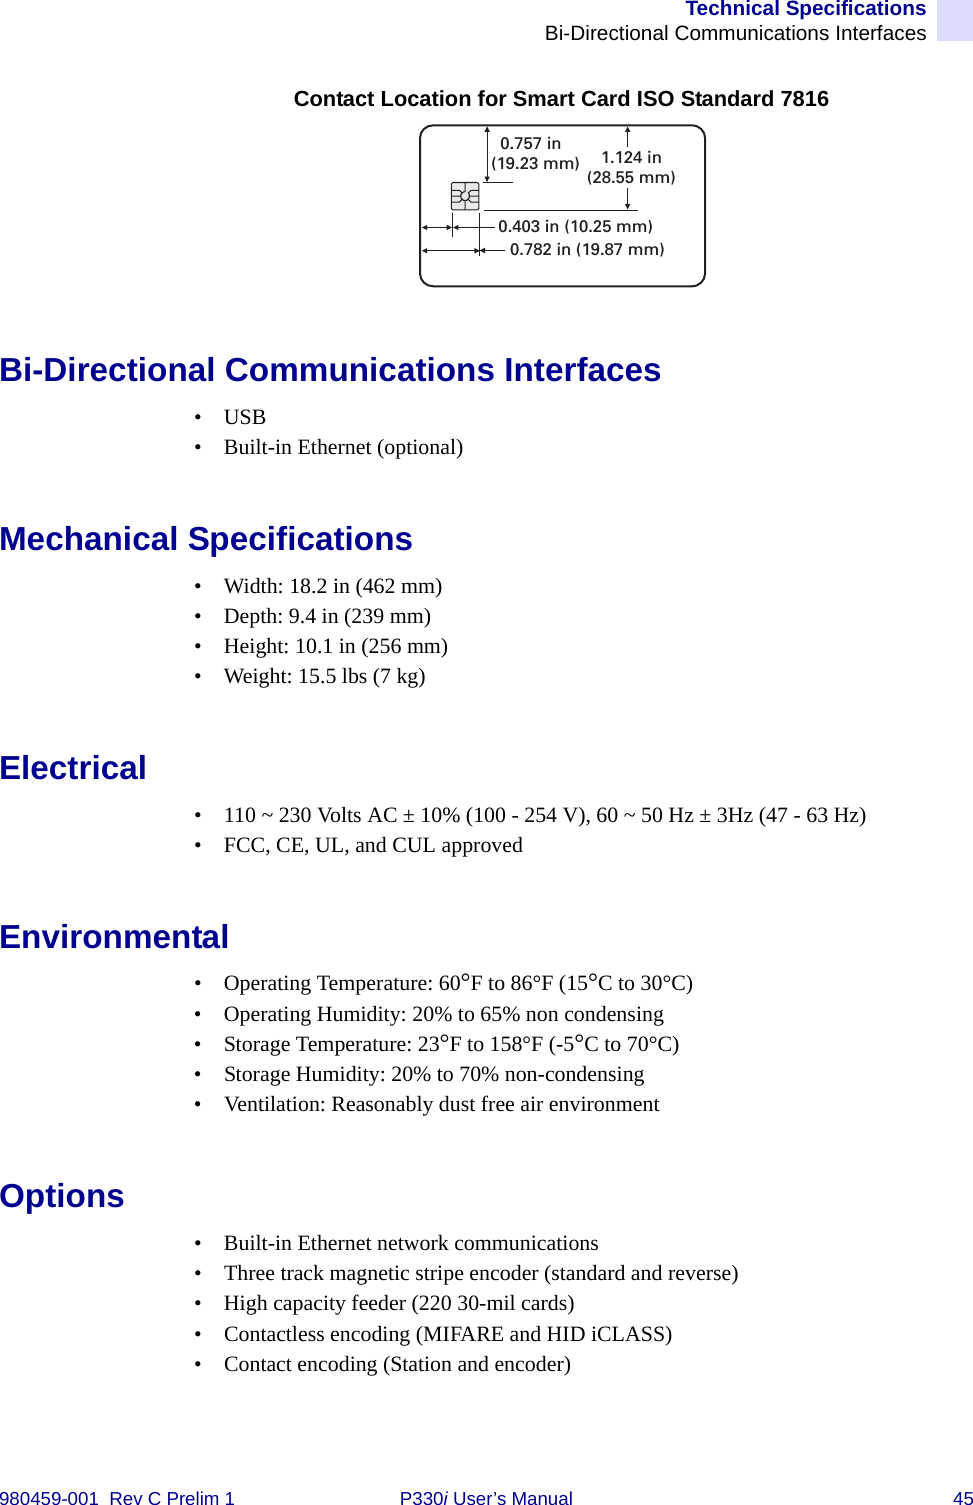 Technical SpecificationsBi-Directional Communications Interfaces980459-001  Rev C Prelim 1 P330i User’s Manual 45Contact Location for Smart Card ISO Standard 7816Bi-Directional Communications Interfaces•USB• Built-in Ethernet (optional)Mechanical Specifications• Width: 18.2 in (462 mm)• Depth: 9.4 in (239 mm)• Height: 10.1 in (256 mm)• Weight: 15.5 lbs (7 kg)Electrical• 110 ~ 230 Volts AC ± 10% (100 - 254 V), 60 ~ 50 Hz ± 3Hz (47 - 63 Hz)• FCC, CE, UL, and CUL approvedEnvironmental• Operating Temperature: 60°F to 86°F (15°C to 30°C)• Operating Humidity: 20% to 65% non condensing• Storage Temperature: 23°F to 158°F (-5°C to 70°C)• Storage Humidity: 20% to 70% non-condensing• Ventilation: Reasonably dust free air environmentOptions• Built-in Ethernet network communications• Three track magnetic stripe encoder (standard and reverse)• High capacity feeder (220 30-mil cards)• Contactless encoding (MIFARE and HID iCLASS)• Contact encoding (Station and encoder)0.403 in (10.25 mm)0.782 in (19.87 mm)0.757 in(19.23 mm) 1.124 in(28.55 mm)